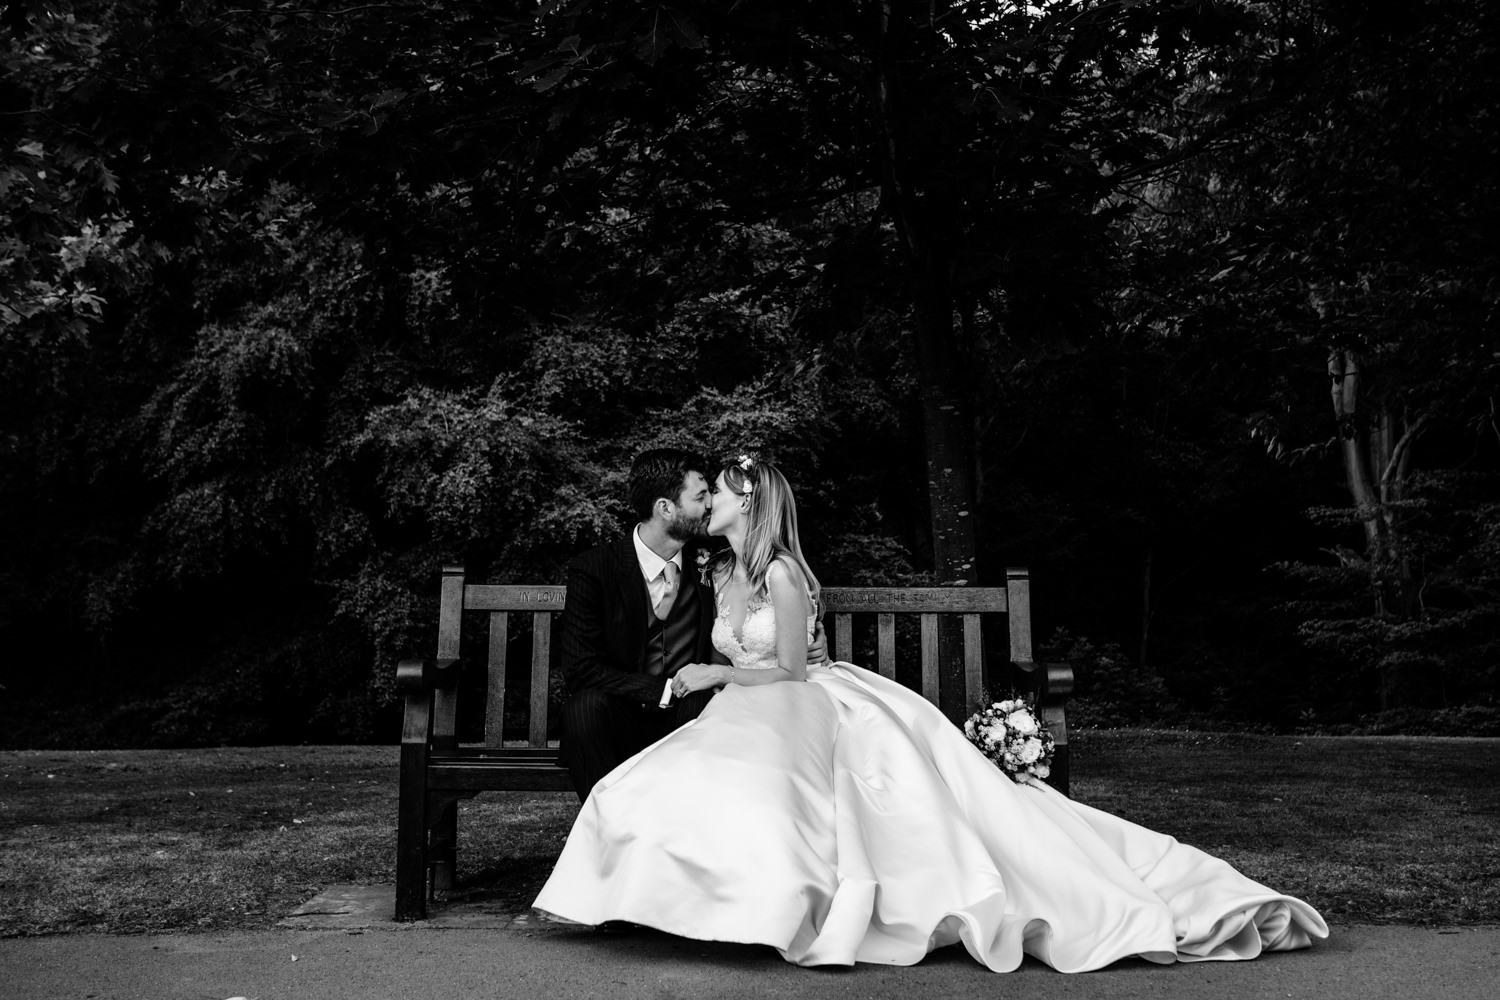 Romantic kiss between a bride and groom, wedding	photographer Whirlowbrook Hall Sheffield